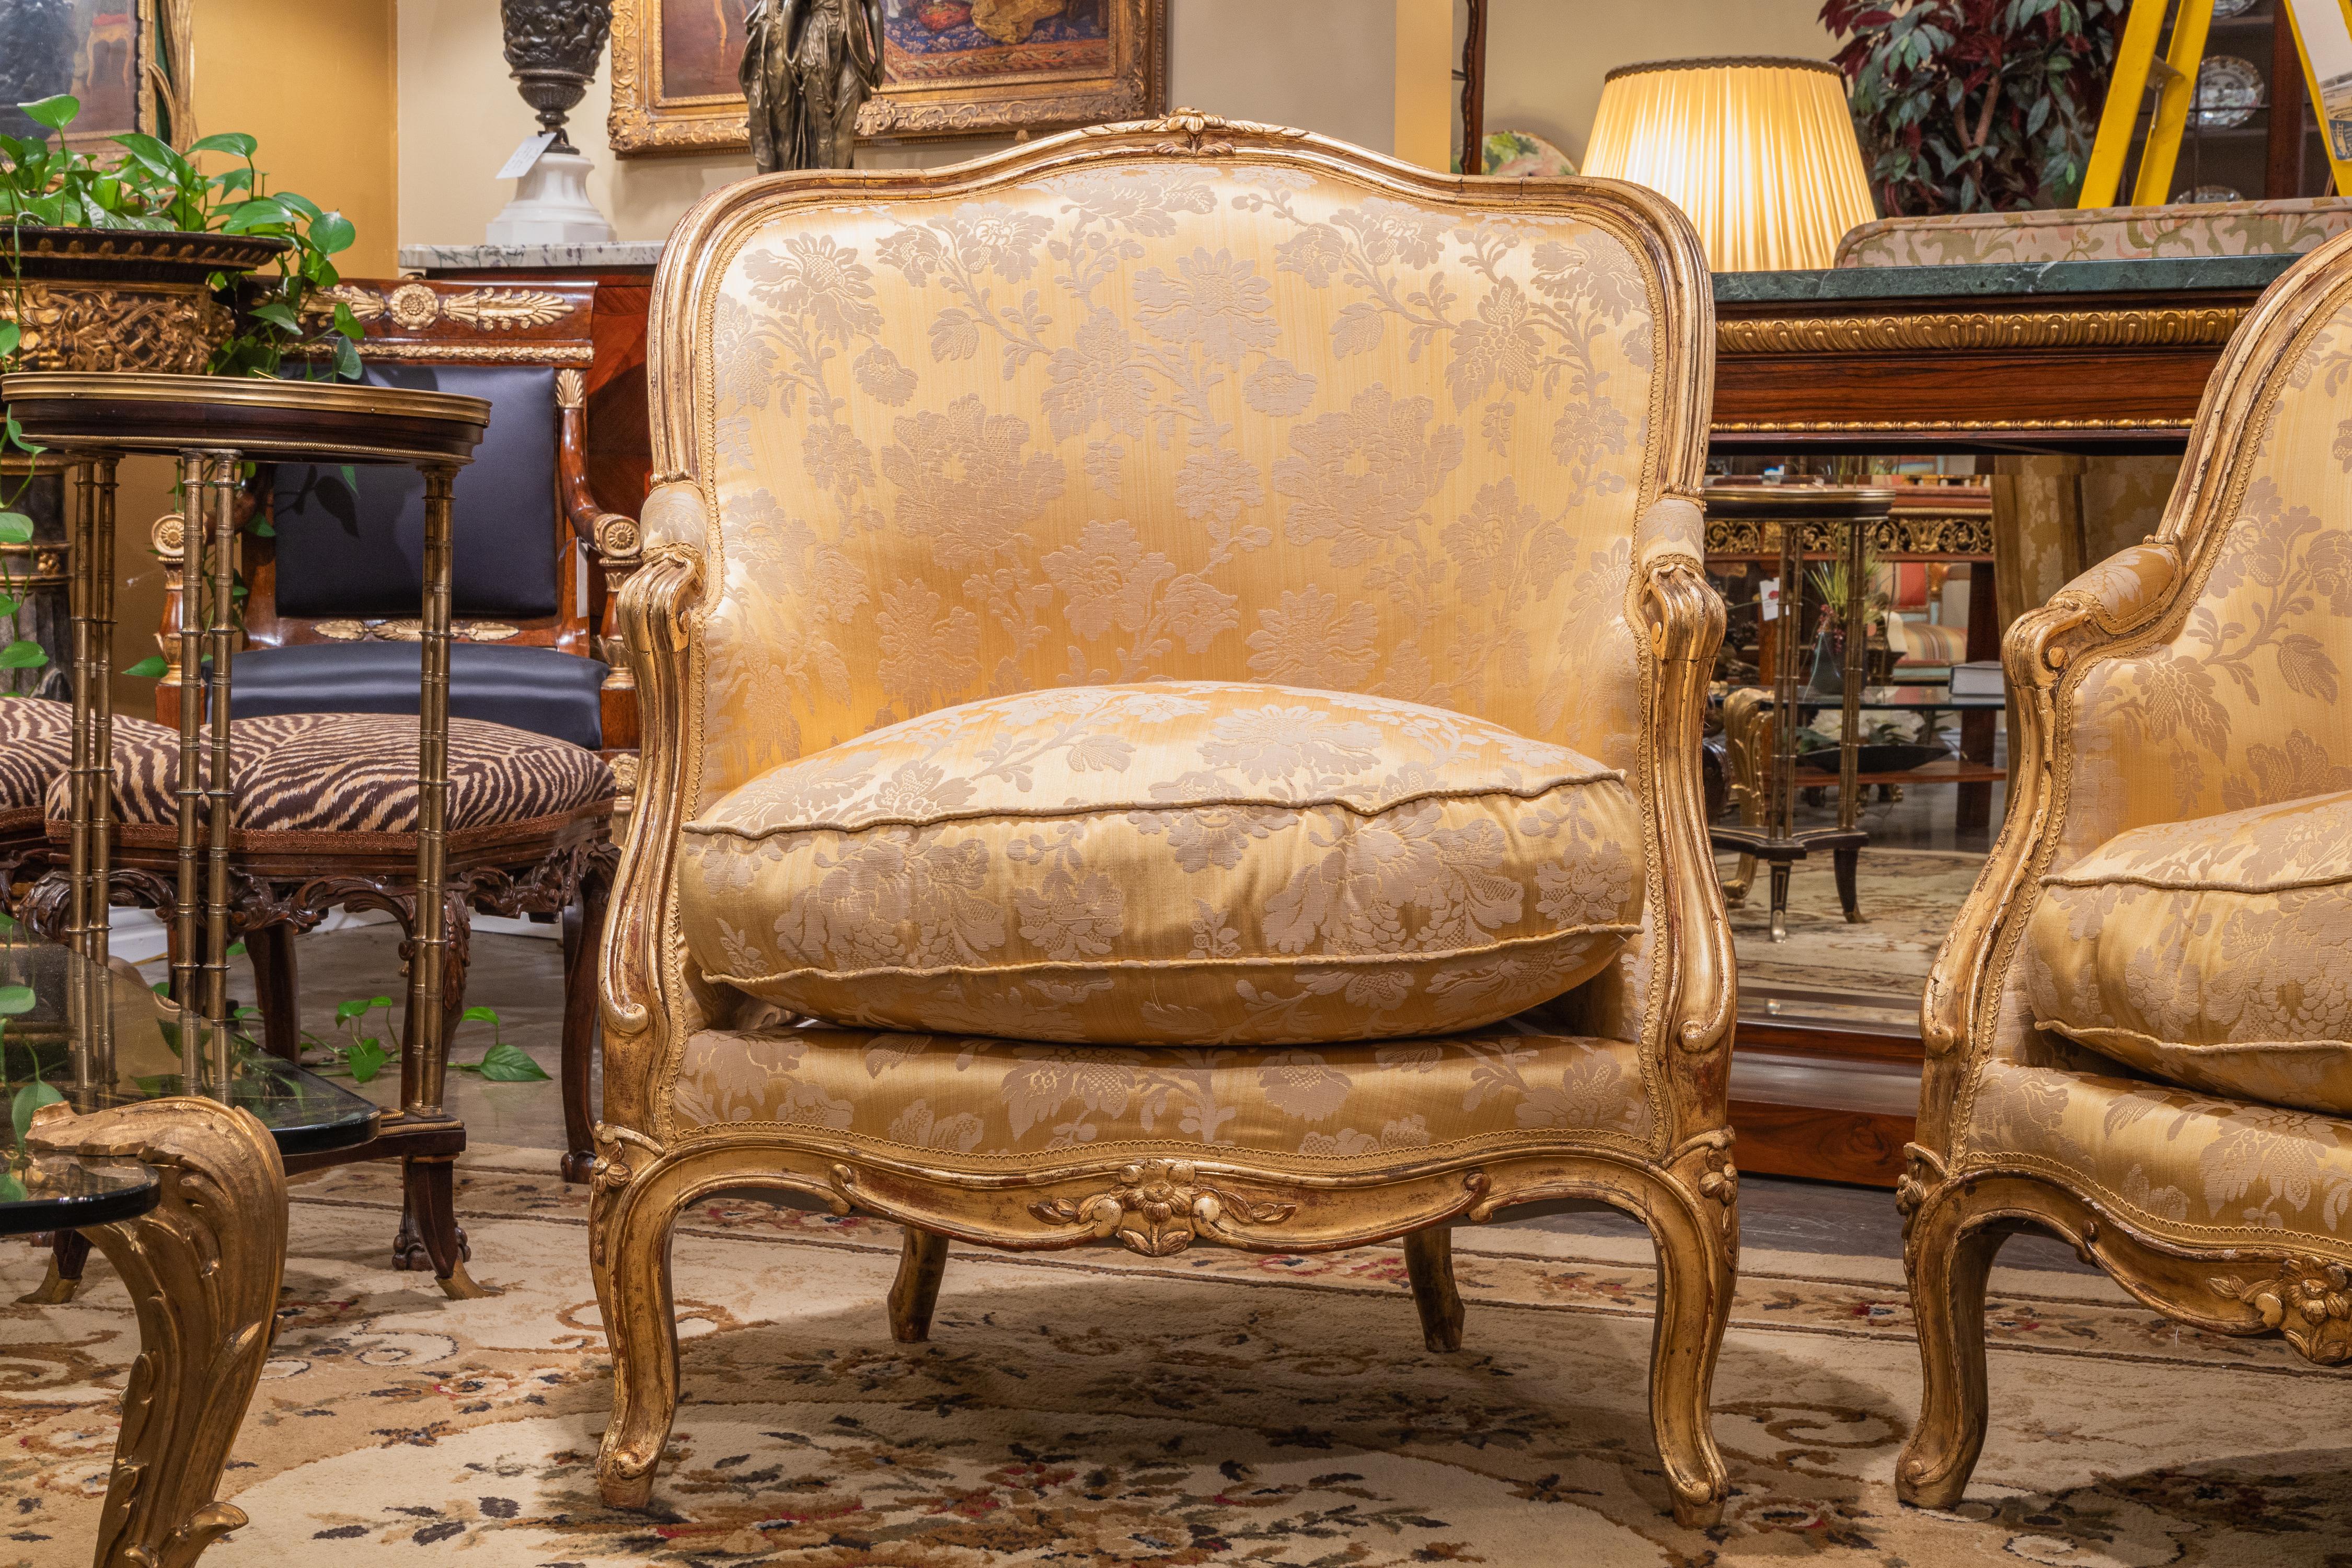 A very fine pair of Louis XV water gilt and large French bergere's. Custom silk upholstery. Water gilt still evident with the original gilding .